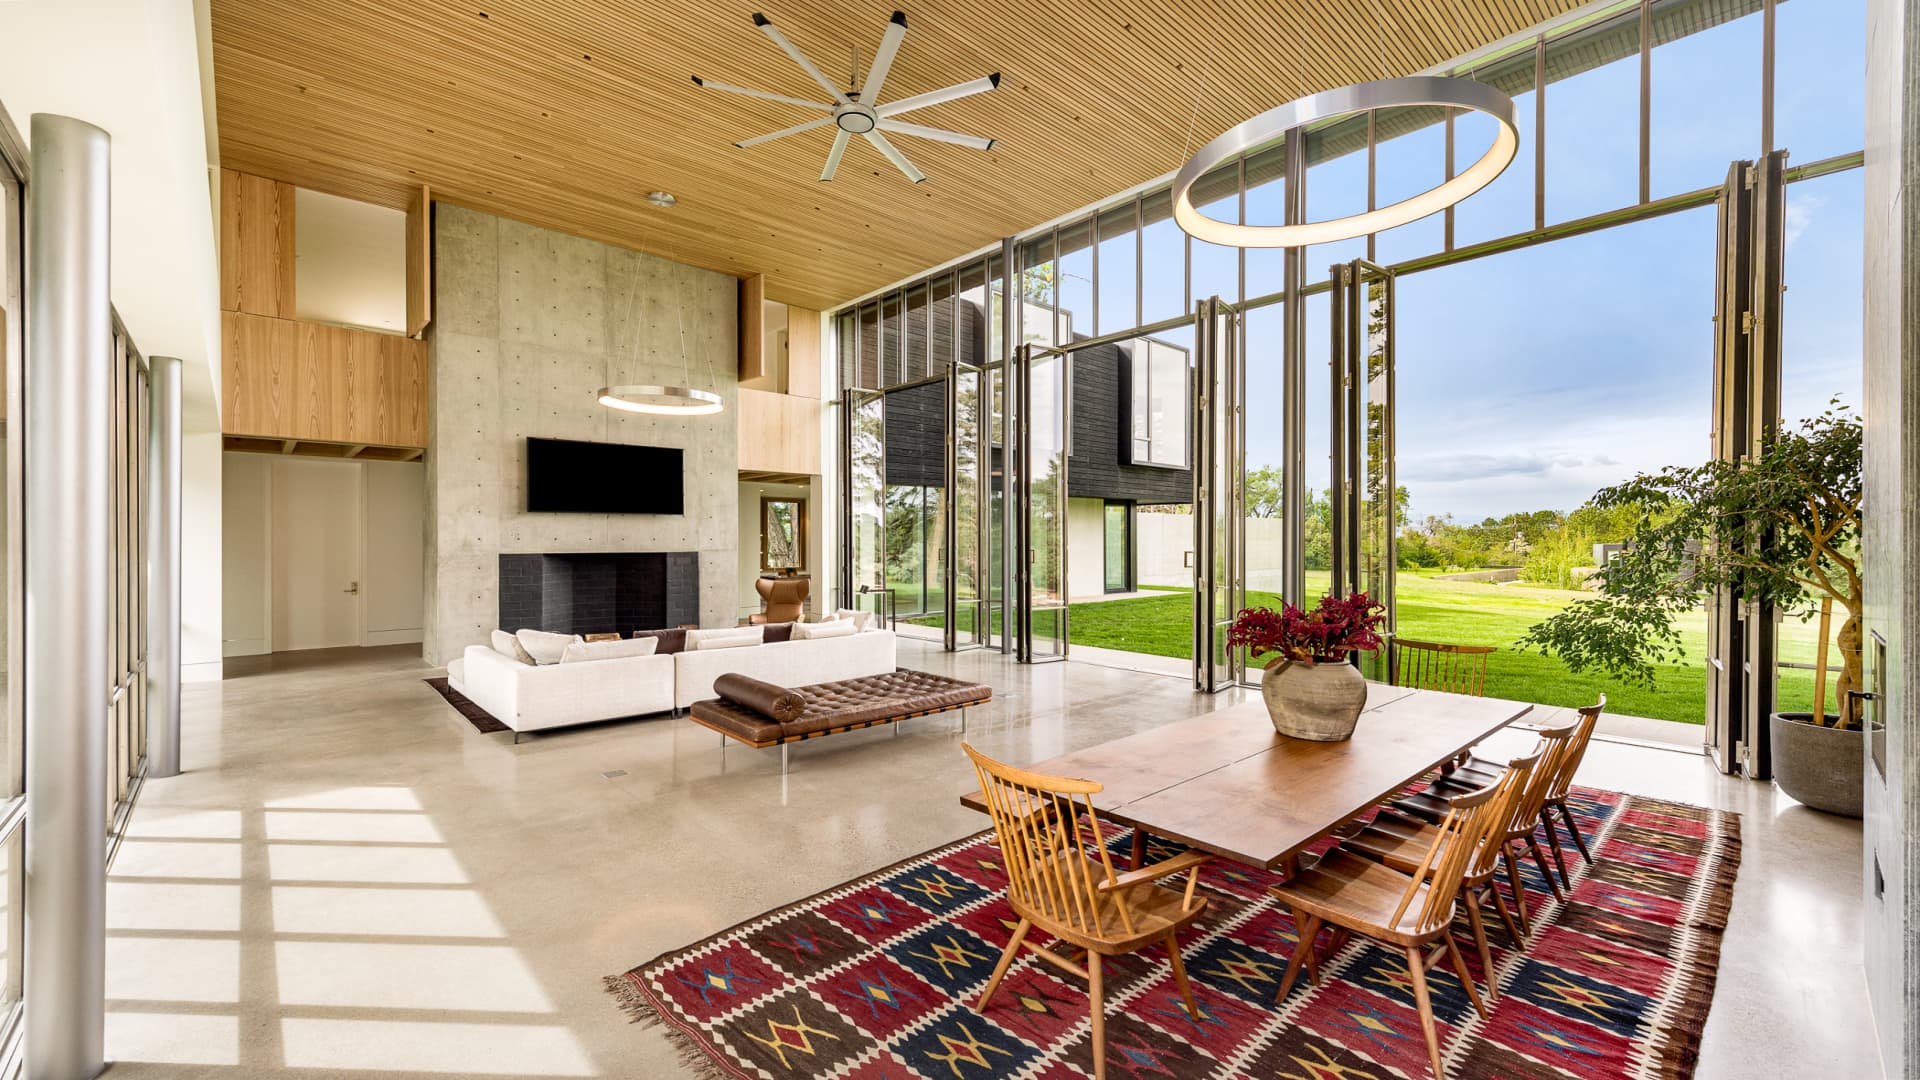 The main home's great room includes 22 ft tall ceilings, polished concrete floors and a wall of floor-to-ceiling glass that opens to a view of the Rocky Mountains.